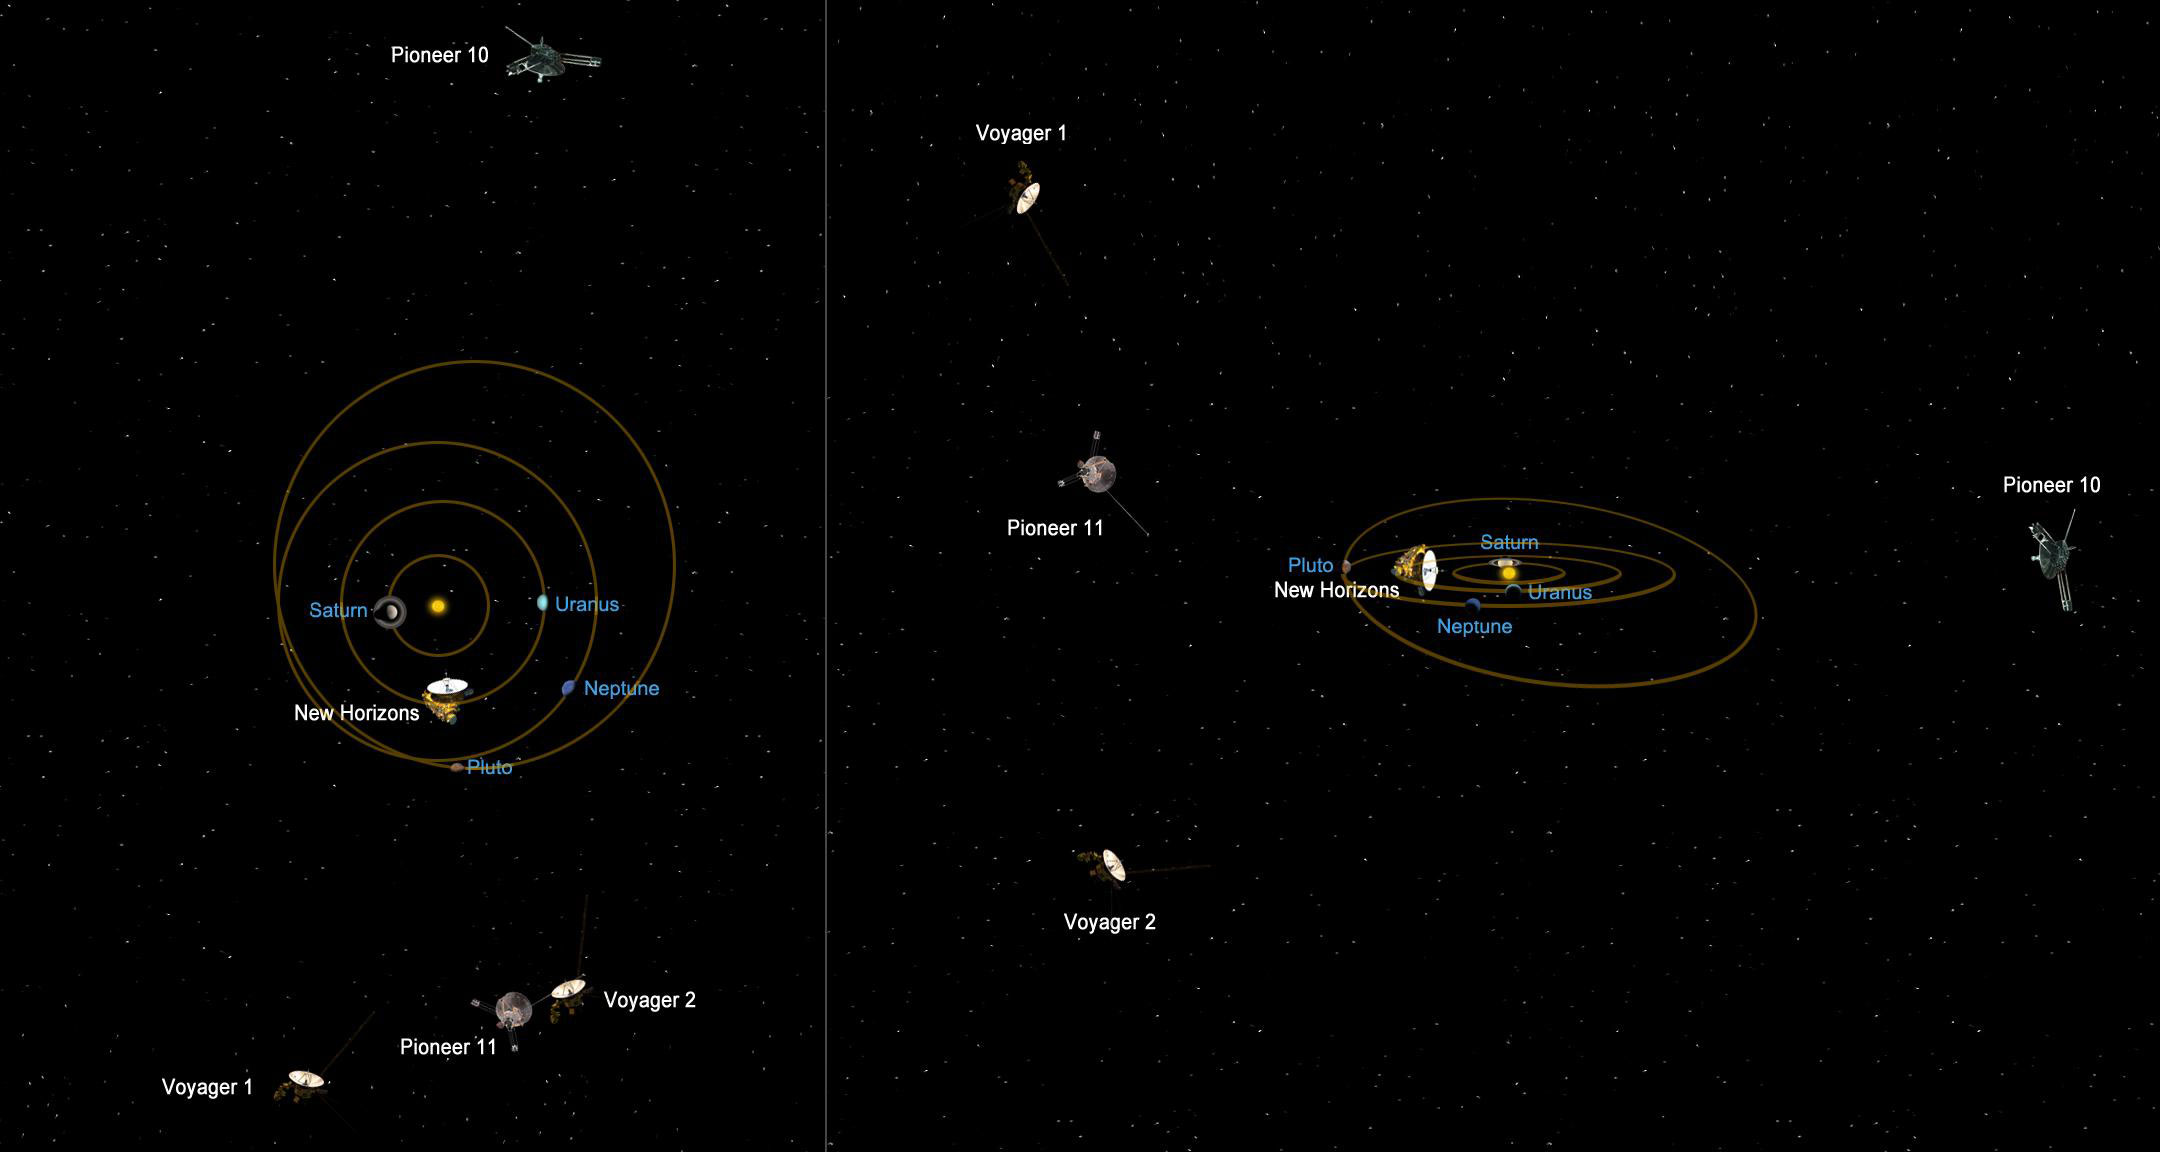 A graphic shows the positions of the outer planets - Jupiter, Saturn, Uranus, and Neptune- in relation to five distant spacecraft. They are Voyager 1, Voyager 2, Pioneer 10, Pioneer 11, and New Horizons